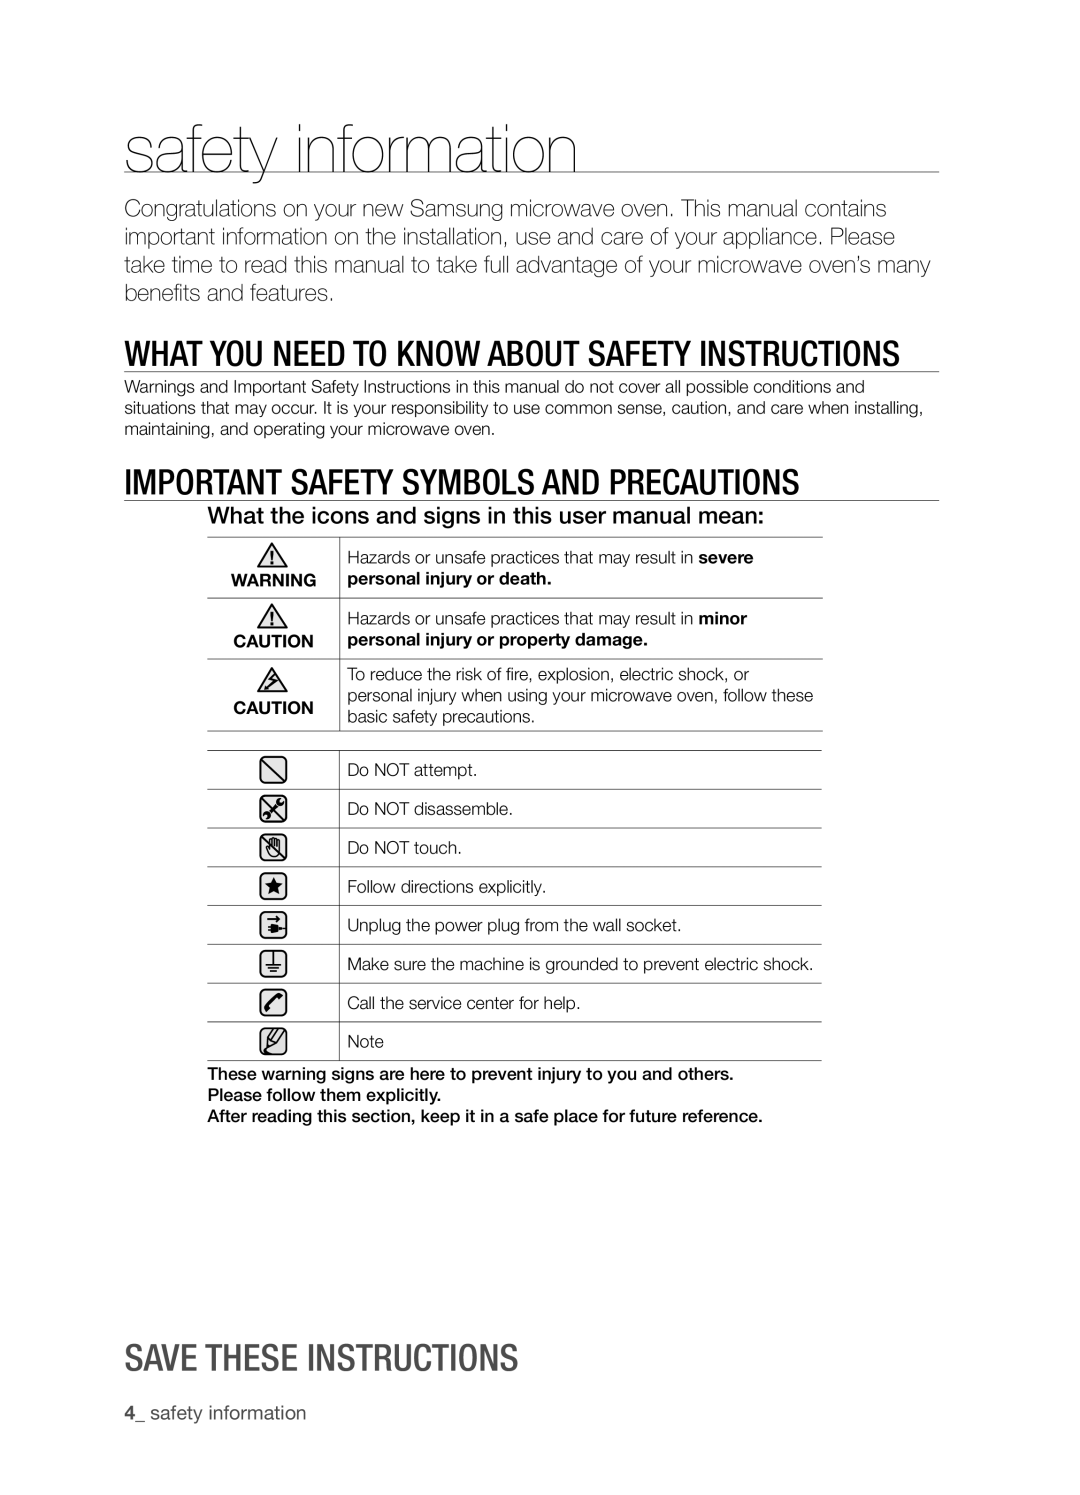 Samsung SMH9151 user manual What you need to know about safety instructions, IMPORTANT safety symbols and precautions 